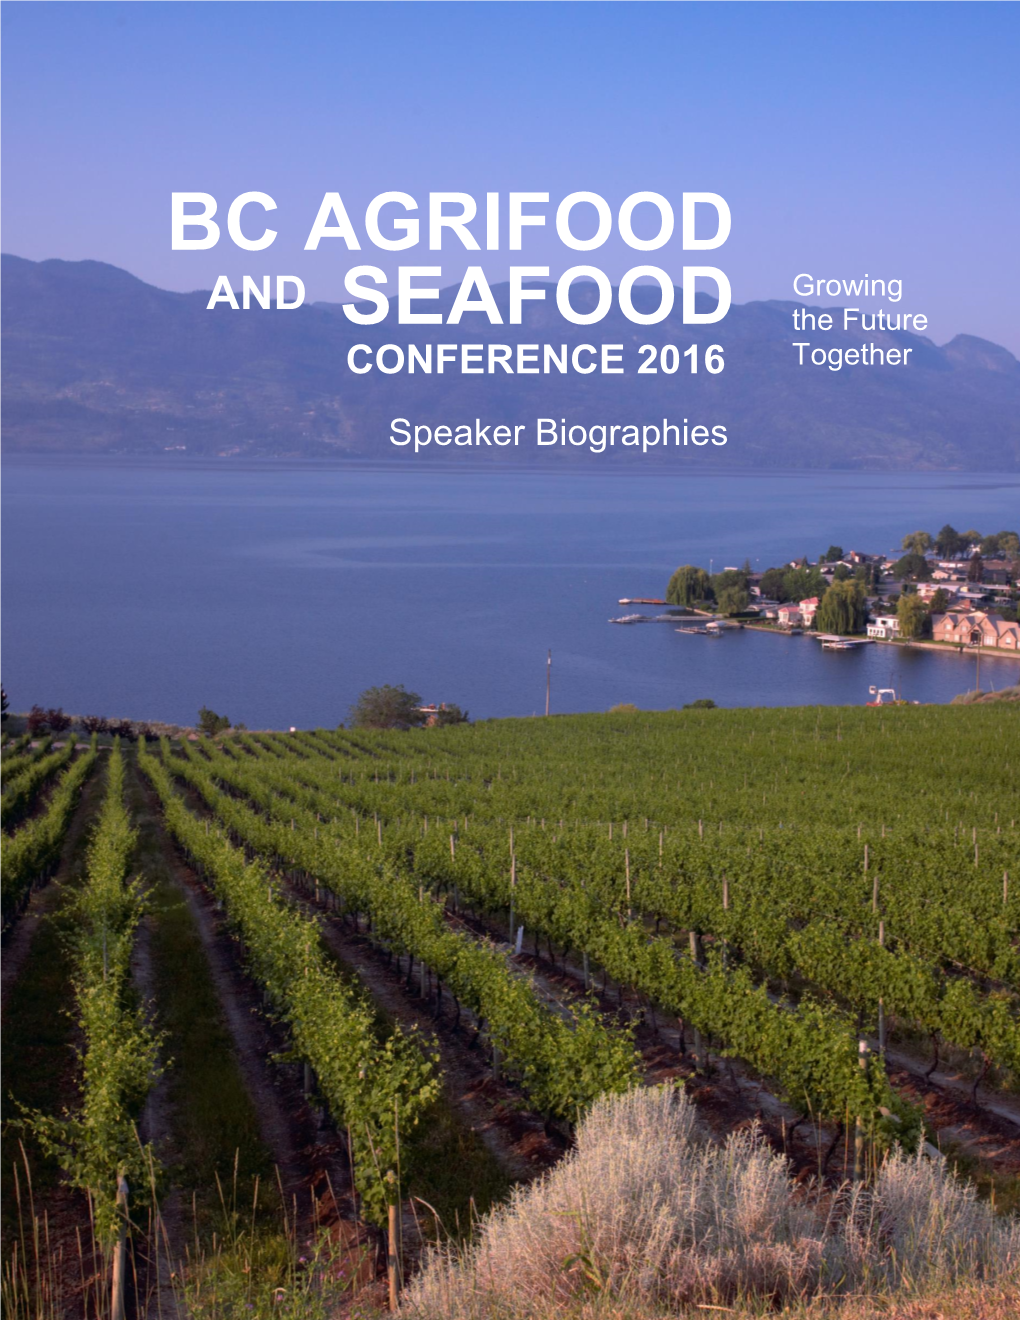 Bc Agrifood and Seafood Conference Overview